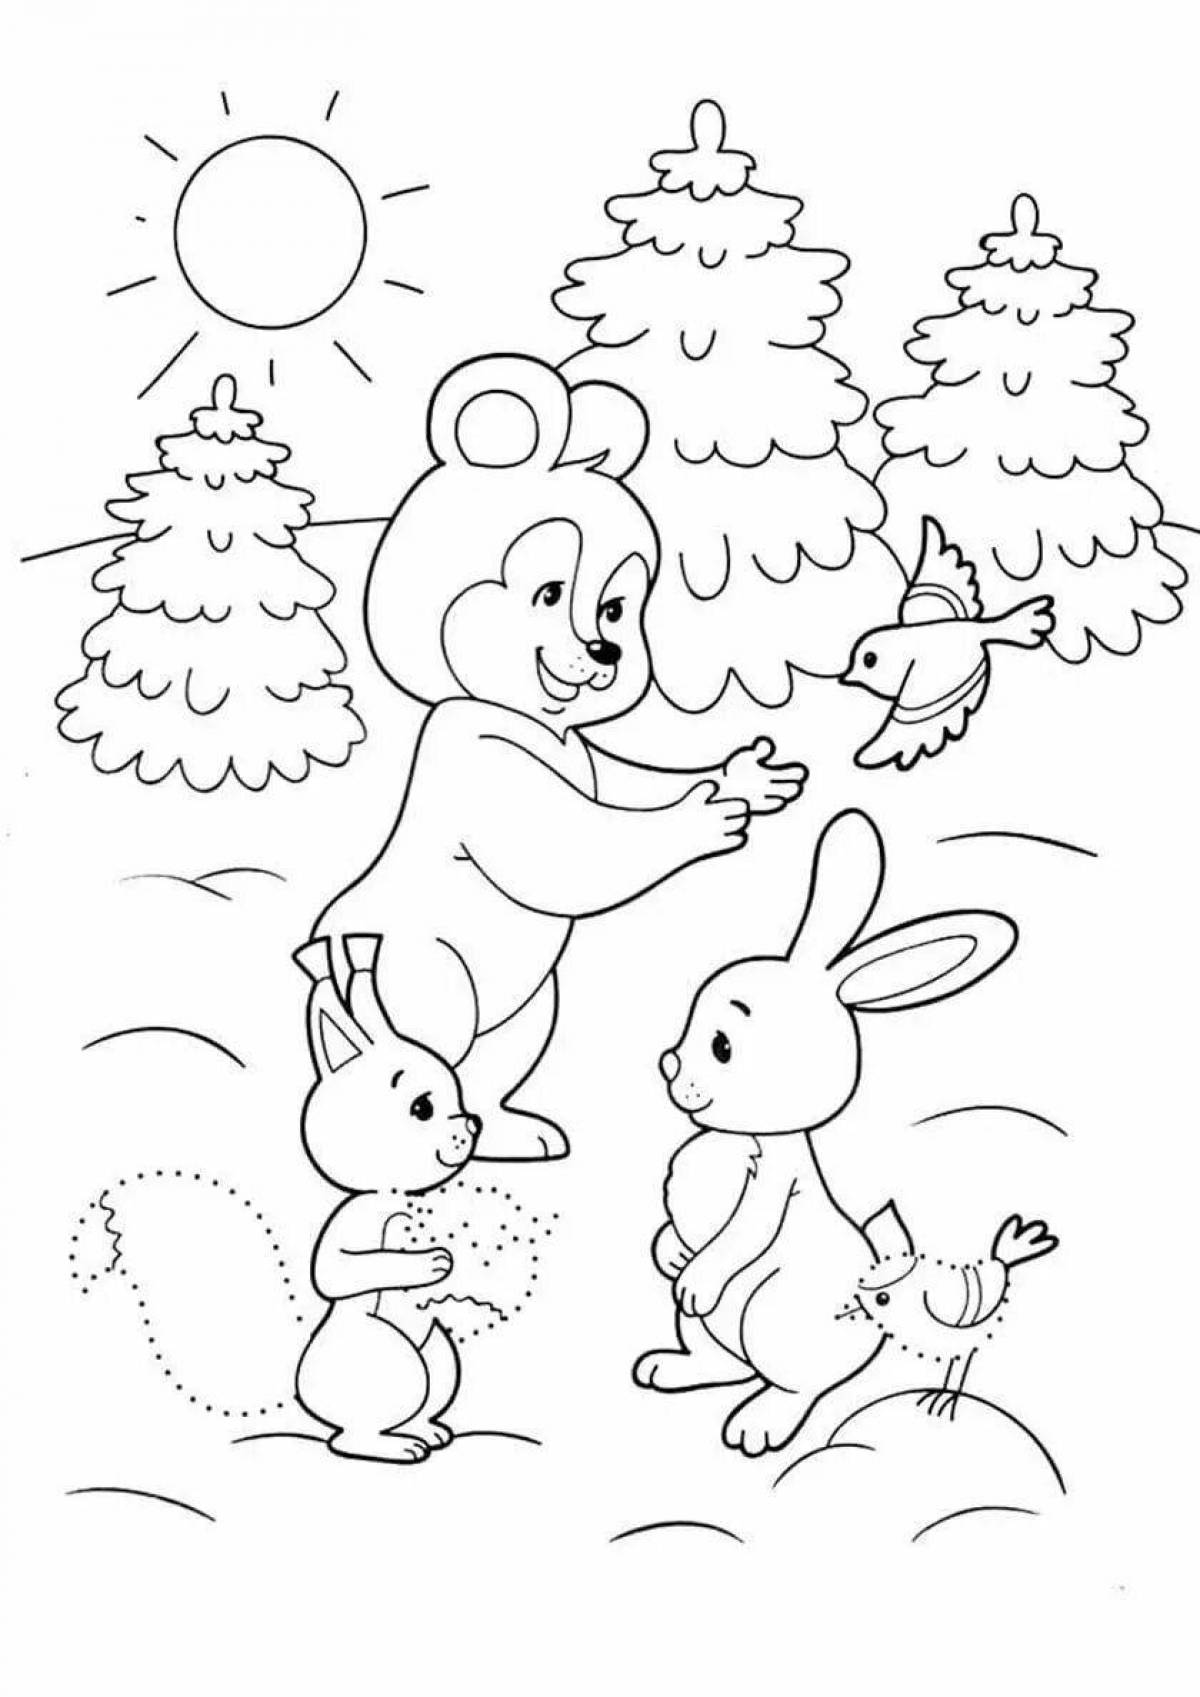 Fluffy winter coloring book